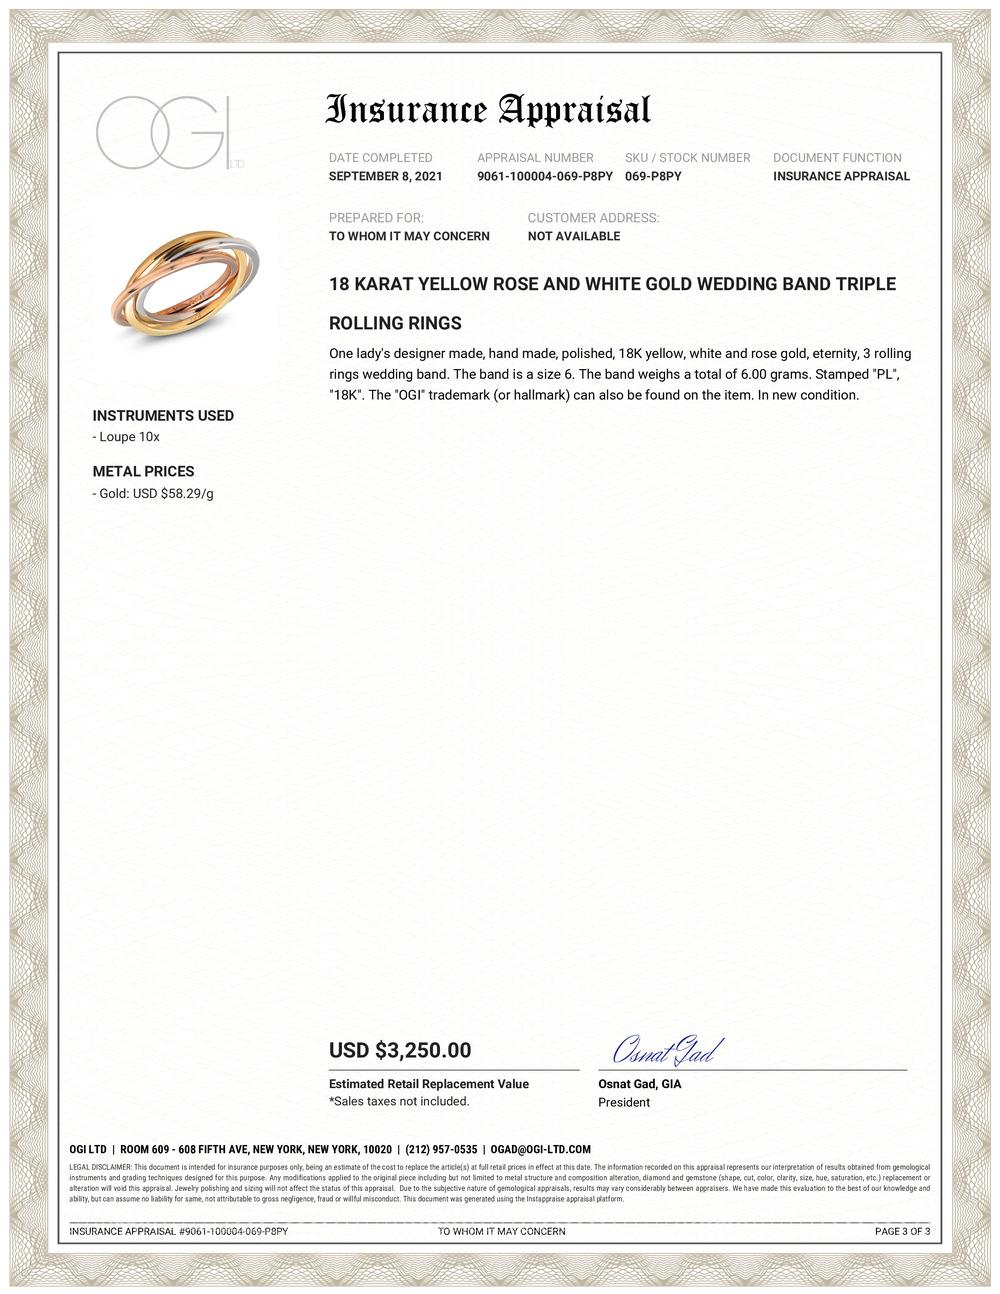 Eighteen Karat White Yellow and Rose gold rolling ring
Each band measures 1.5 millimeter
Ring size 8.25
Comfort fit
Handmade in the USA
Special order none refundable 
Three bands made in die striking process that utilizes an enormous amount of